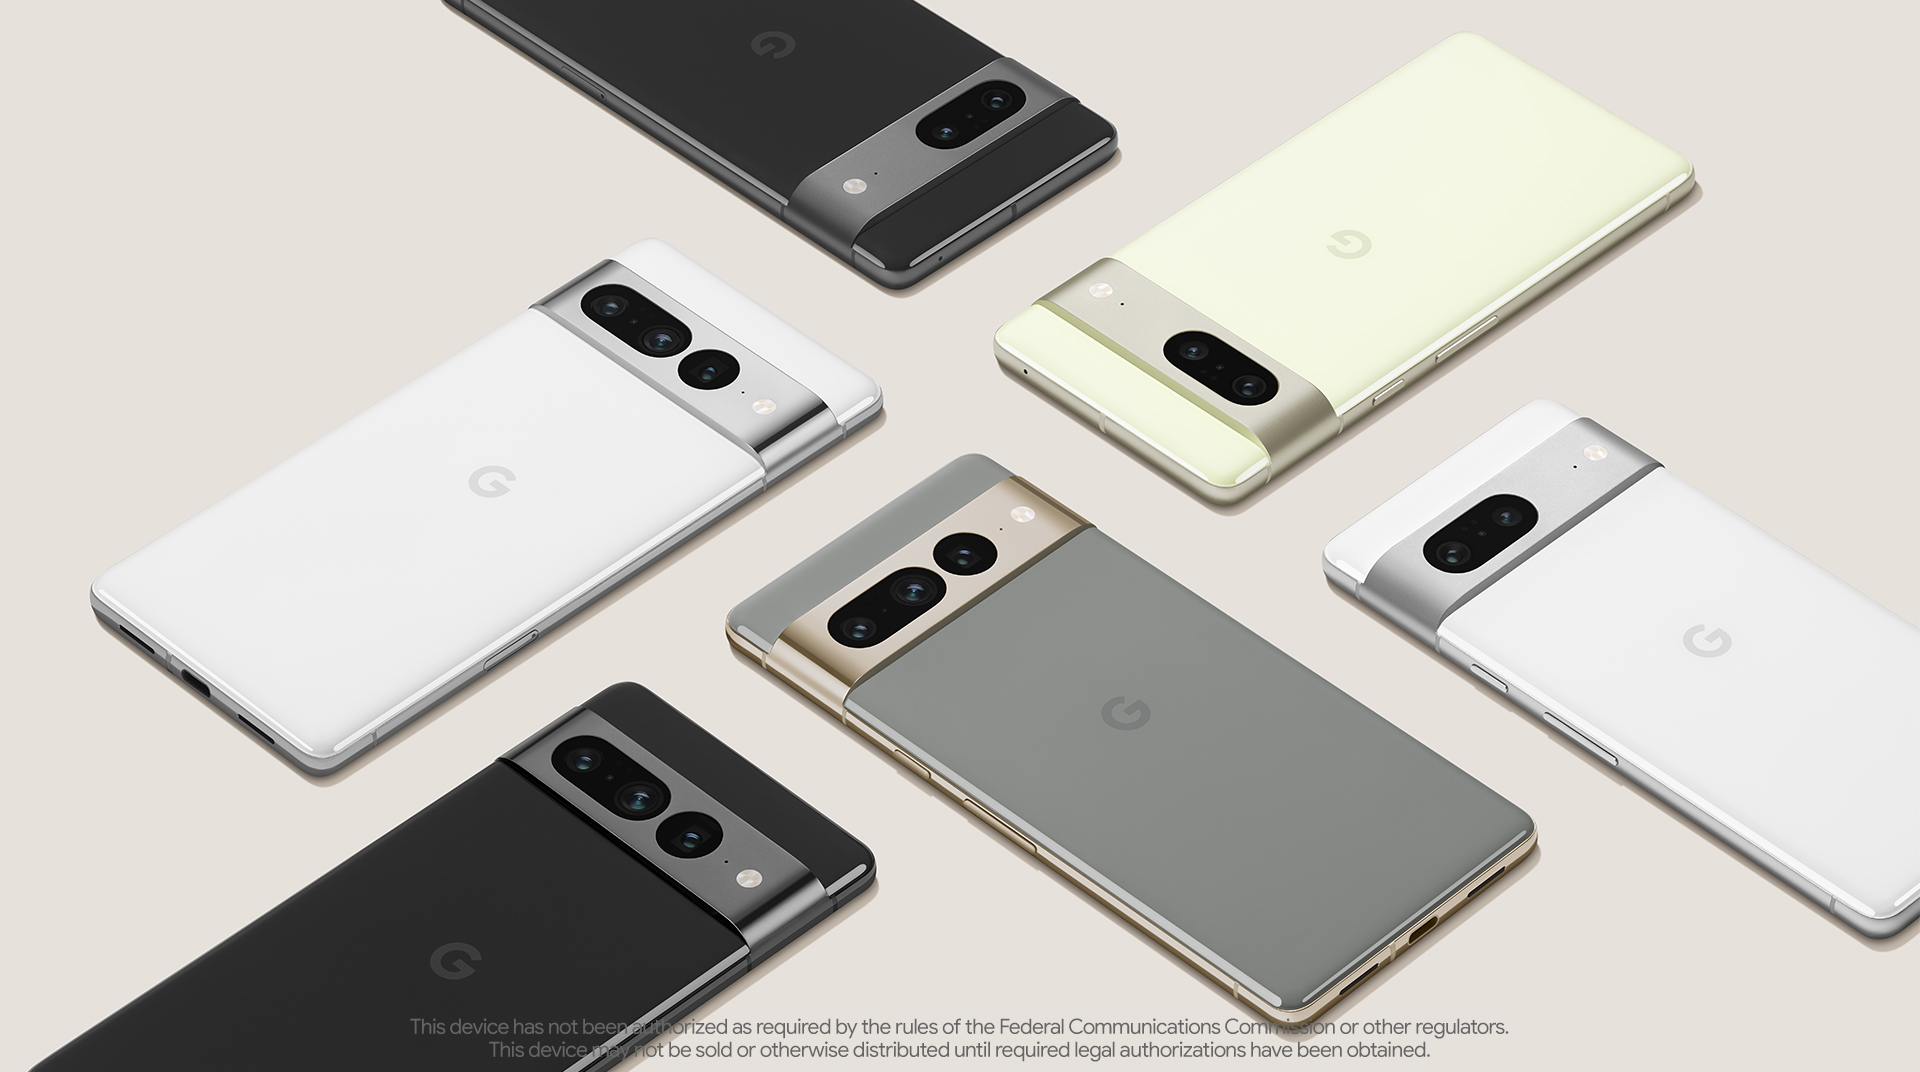 The Google Pixel 7 and 7 Pro